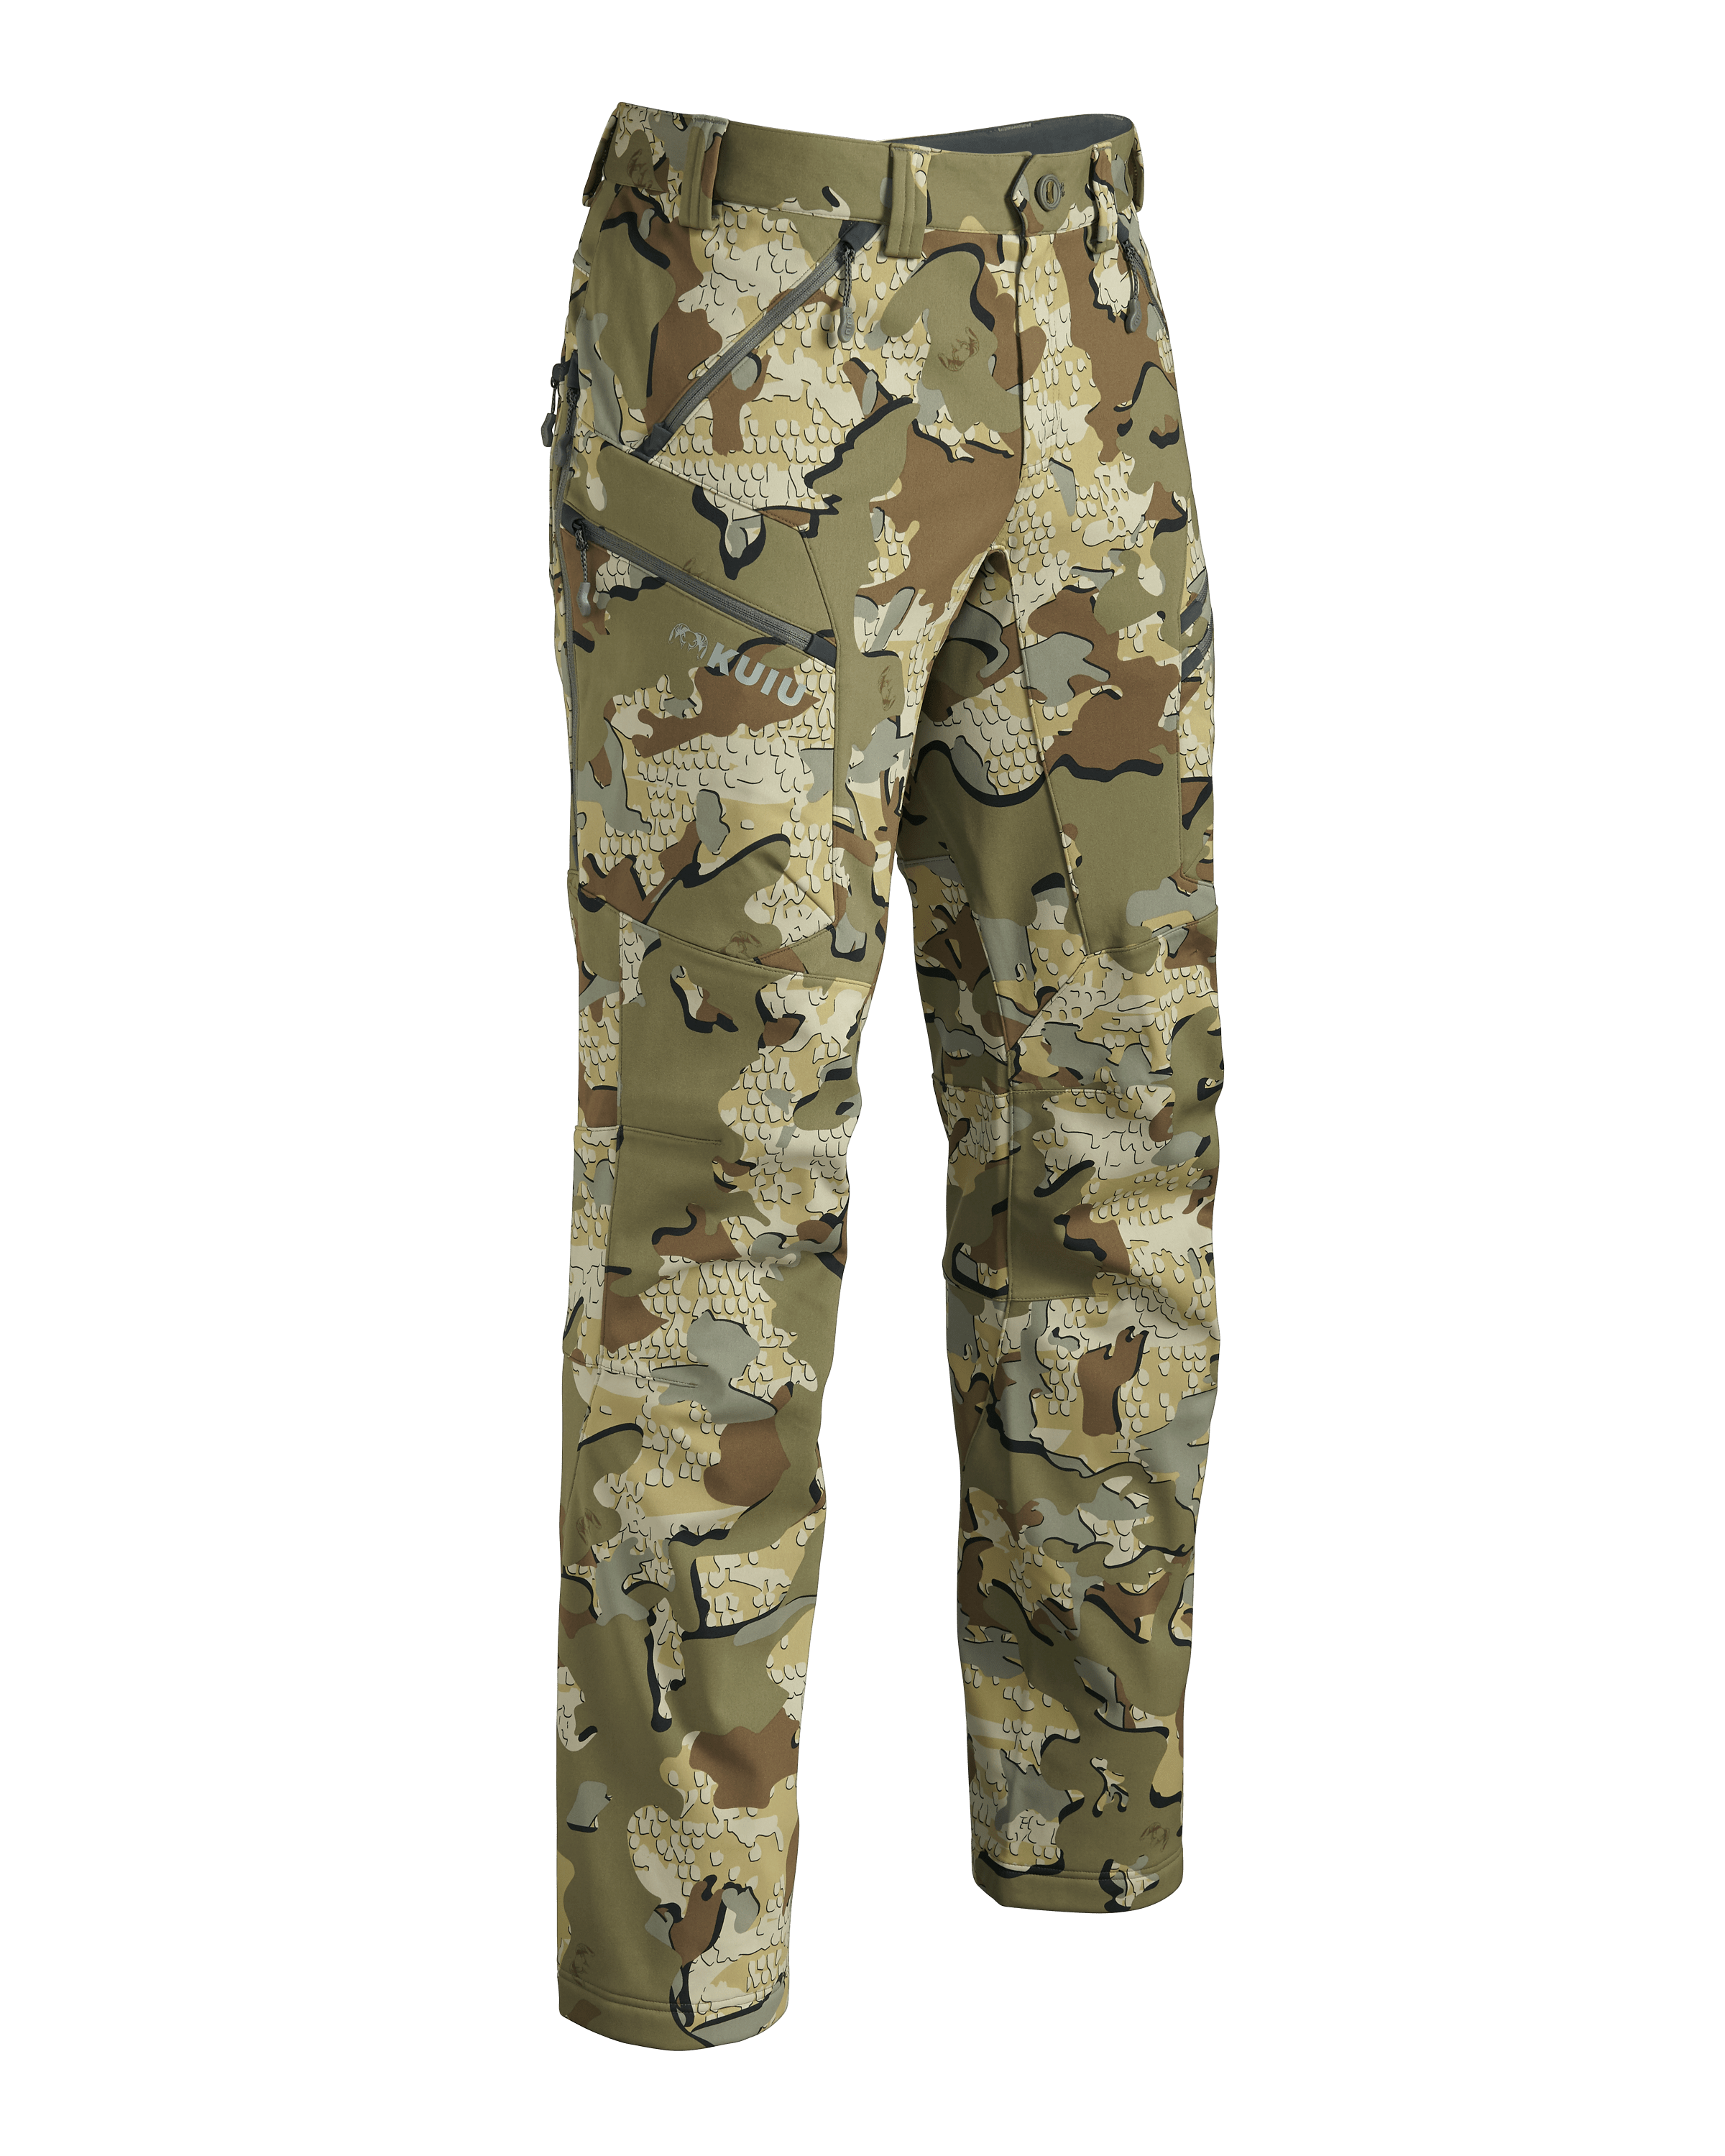 KUIU Axis Hybrid Hunting Pant in Valo | Size 30